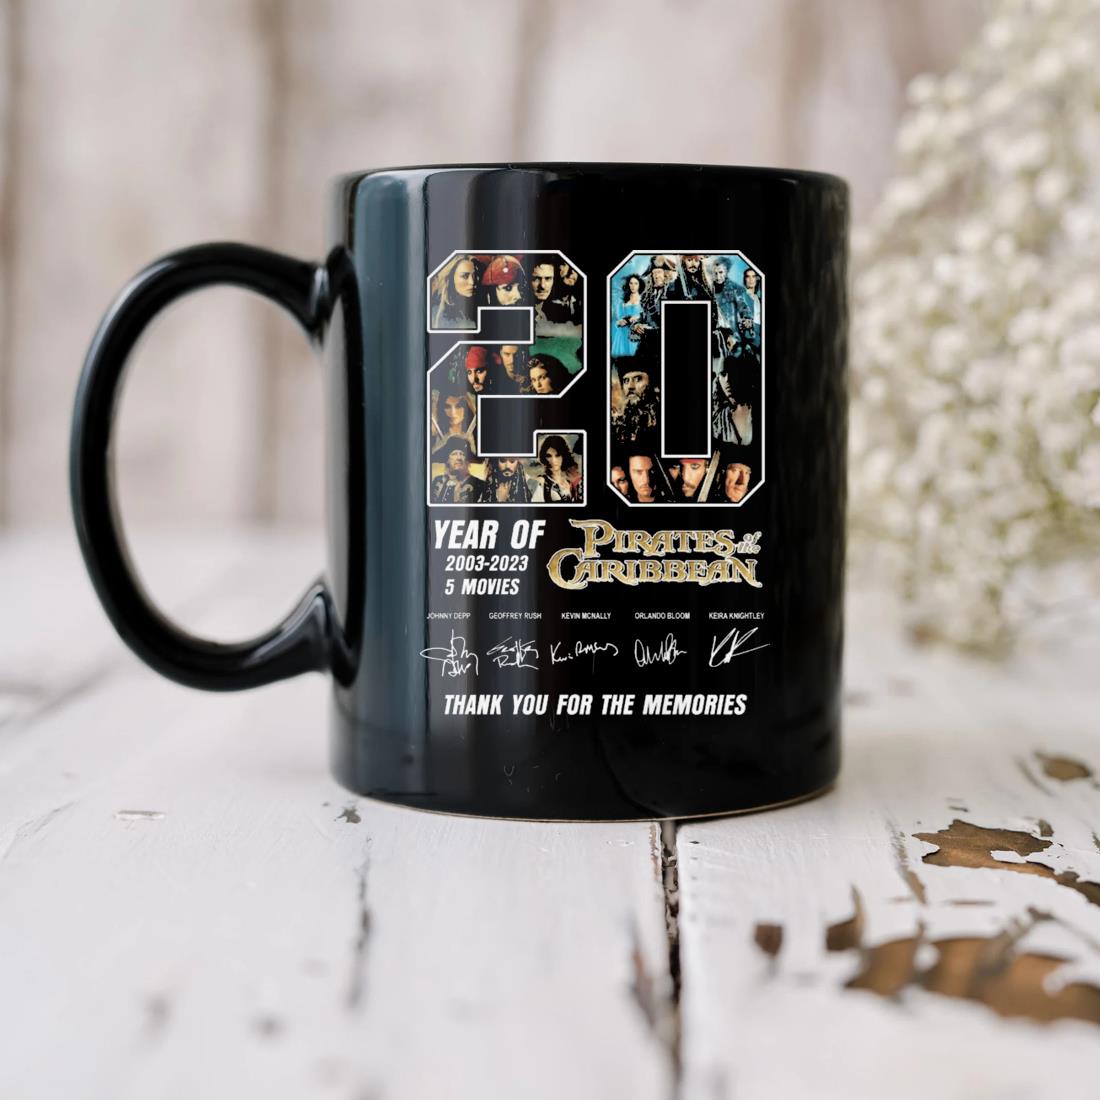 20 Years Of 2003-2023 Pirates Of The Caribbean Thank You For The Memories Signatures Mug